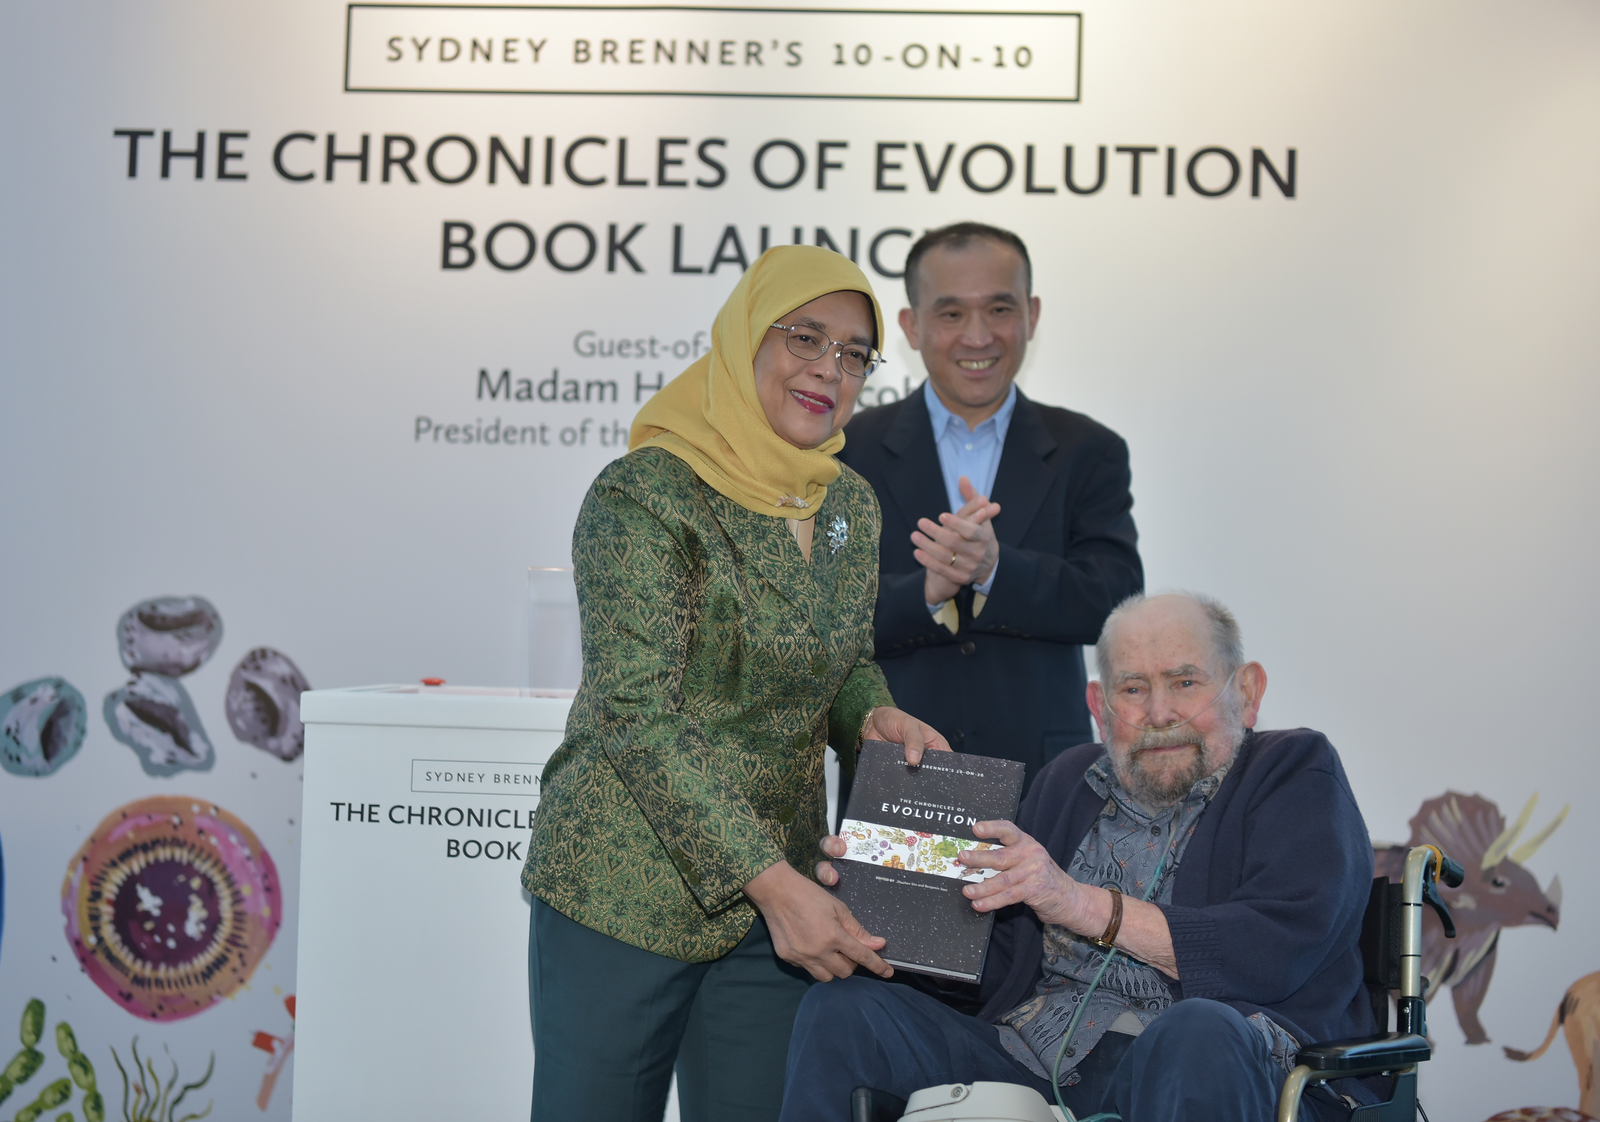 Dr Sydney Brenner, Nobel Laureate and Senior Fellow at A*STAR, presenting a copy of the book to Madam Halimah Yacob, President of the Republic of Singapore.